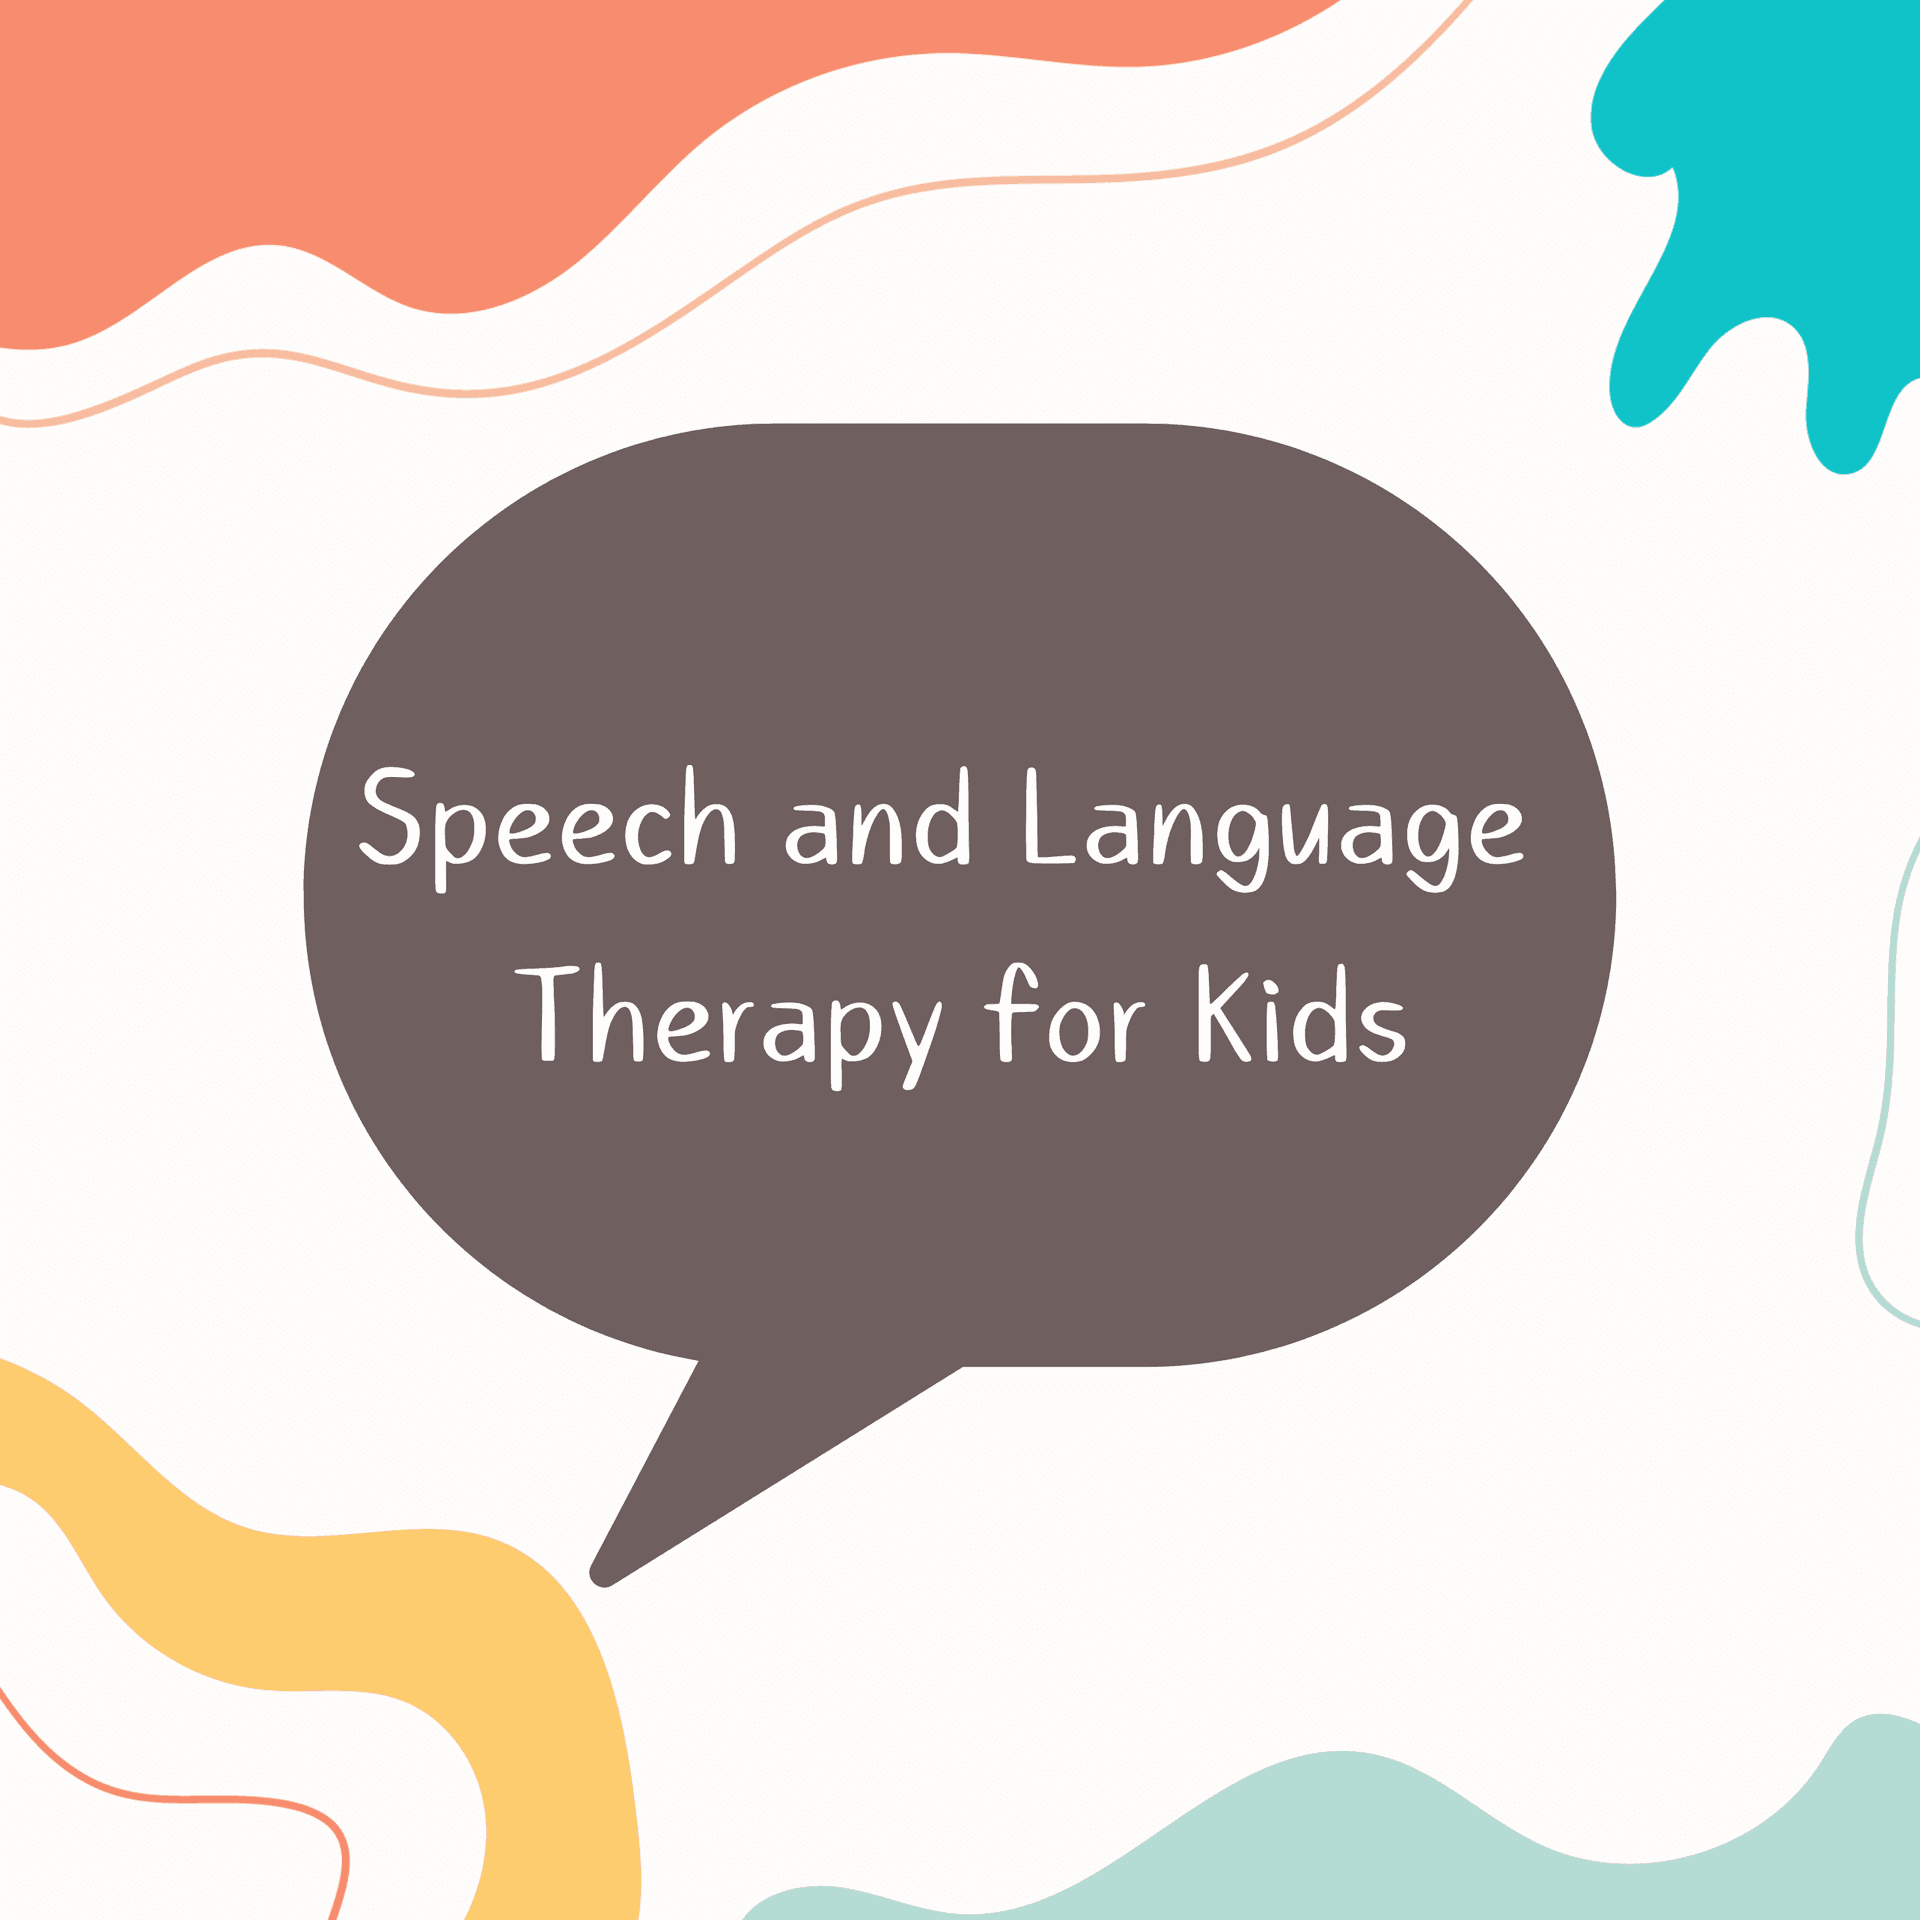 Speech and language therapy for kids